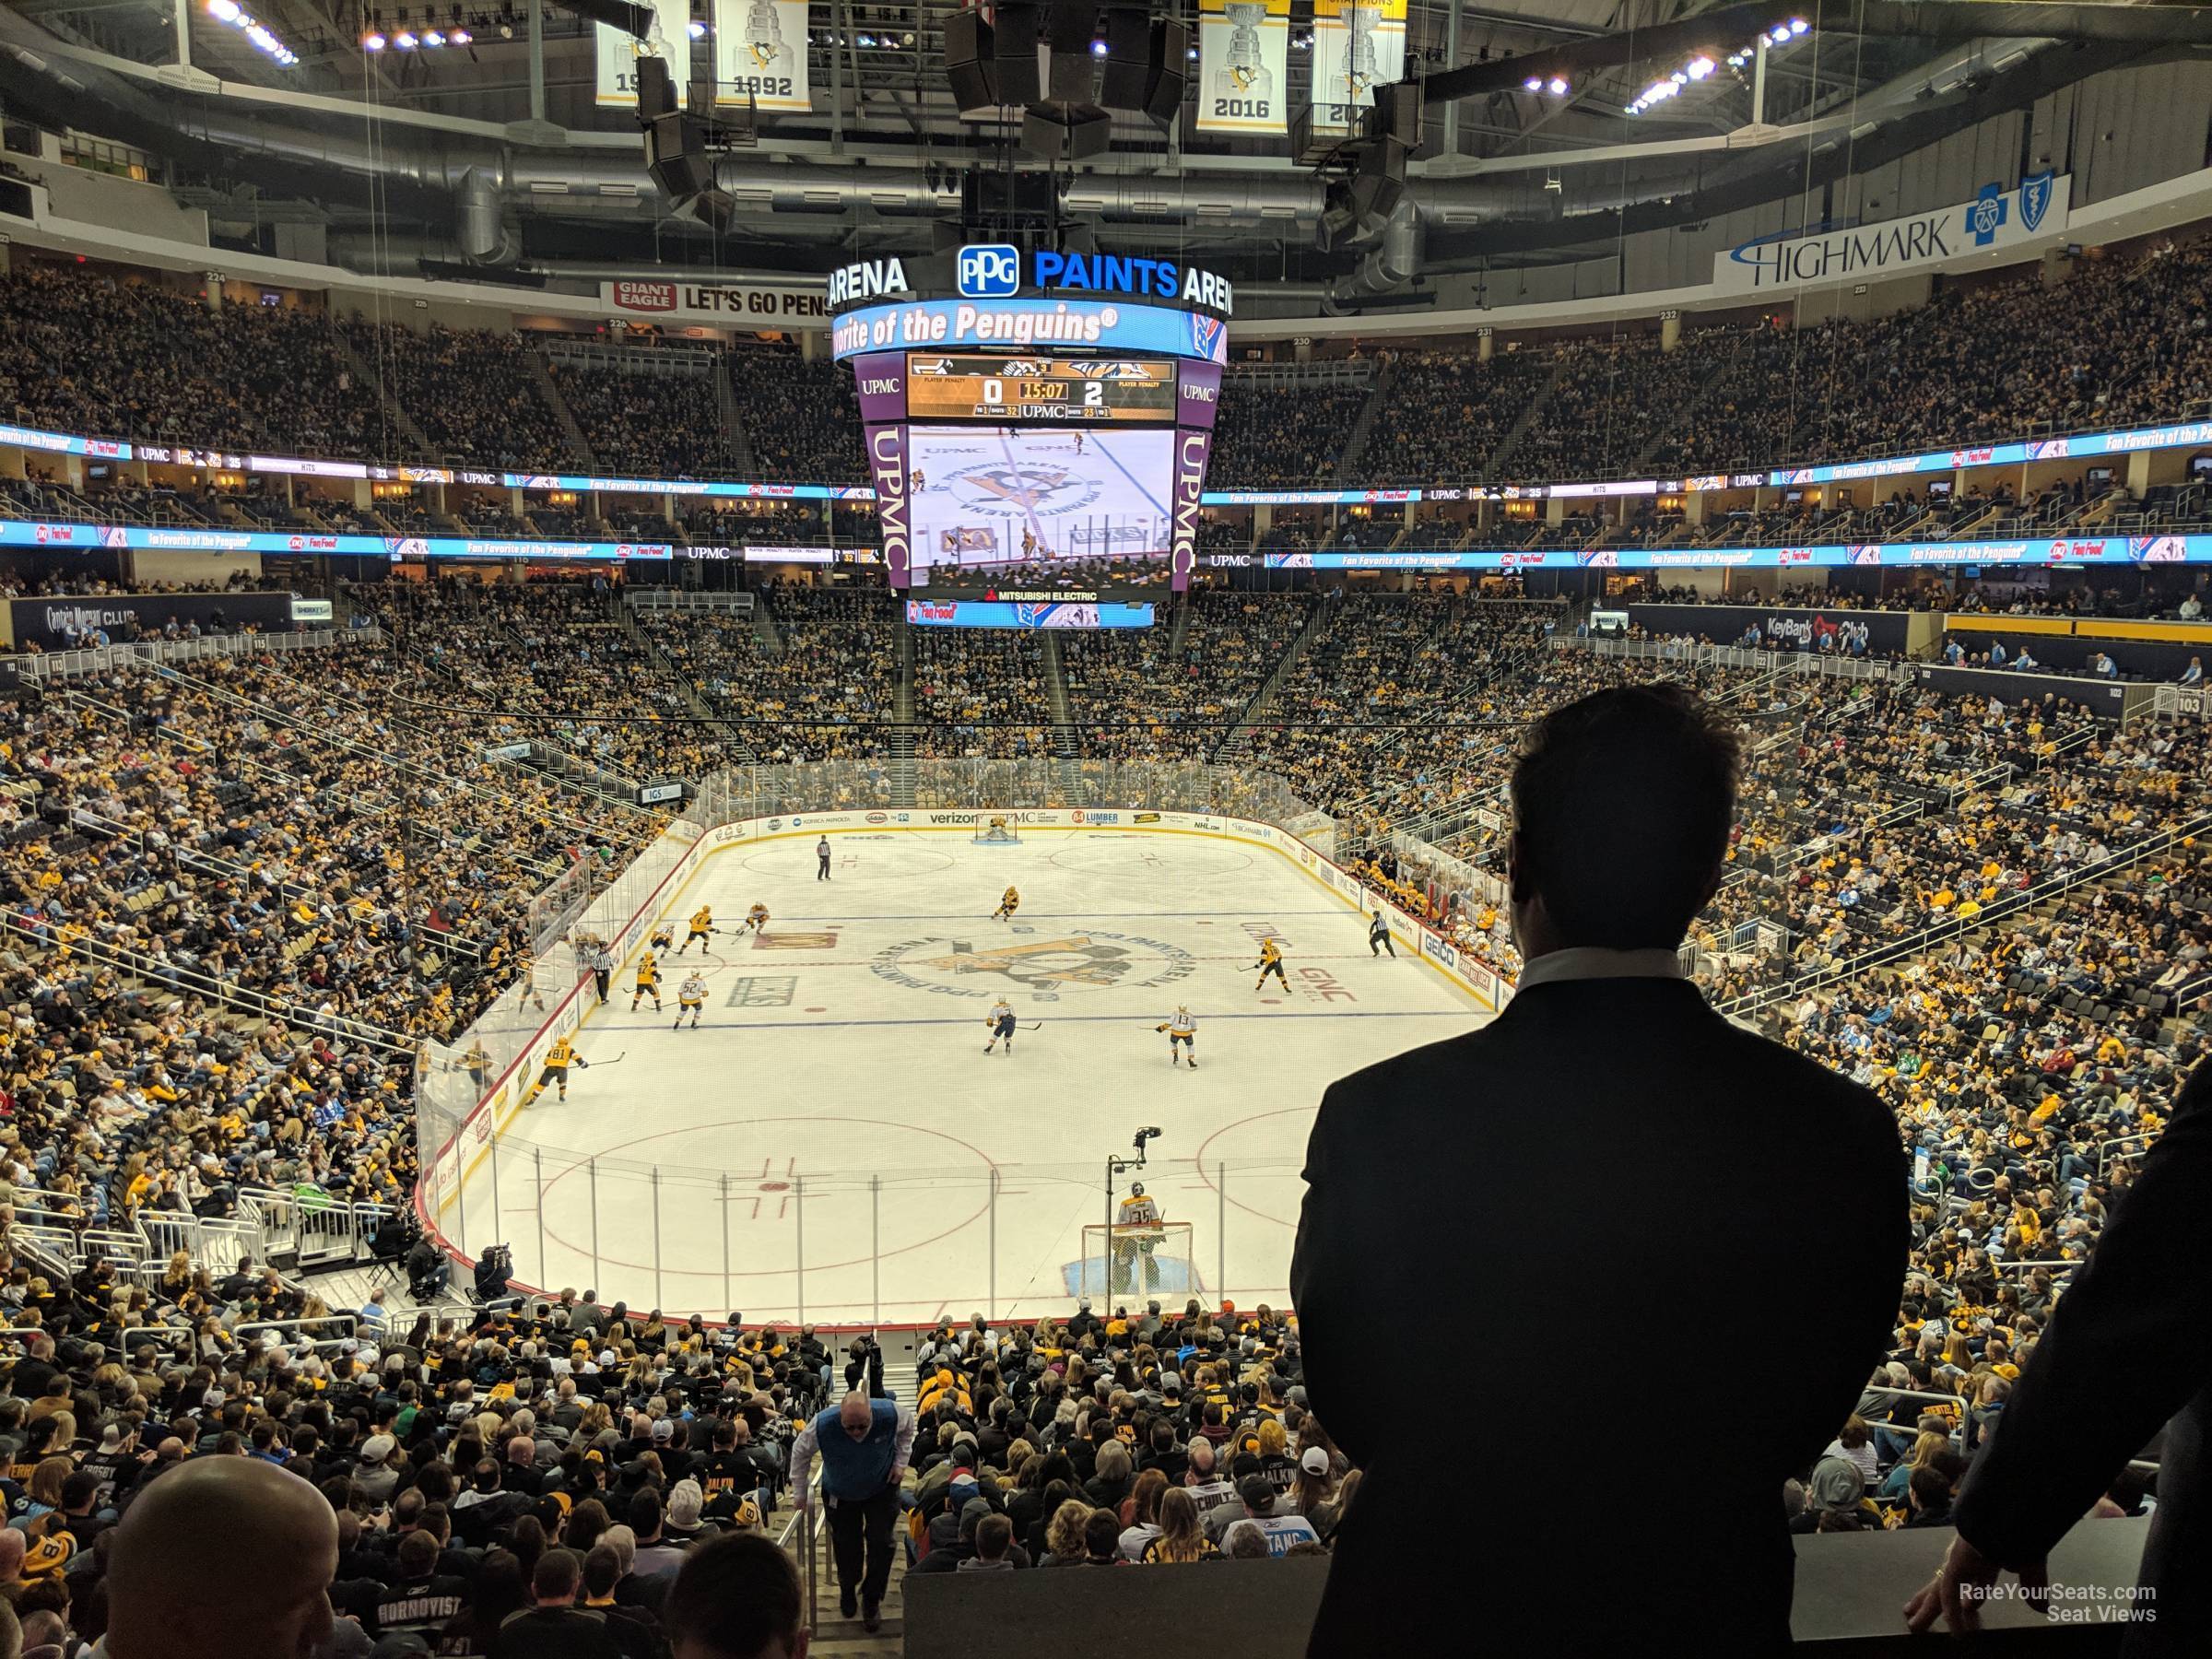 loge box 12 seat view  for hockey - ppg paints arena